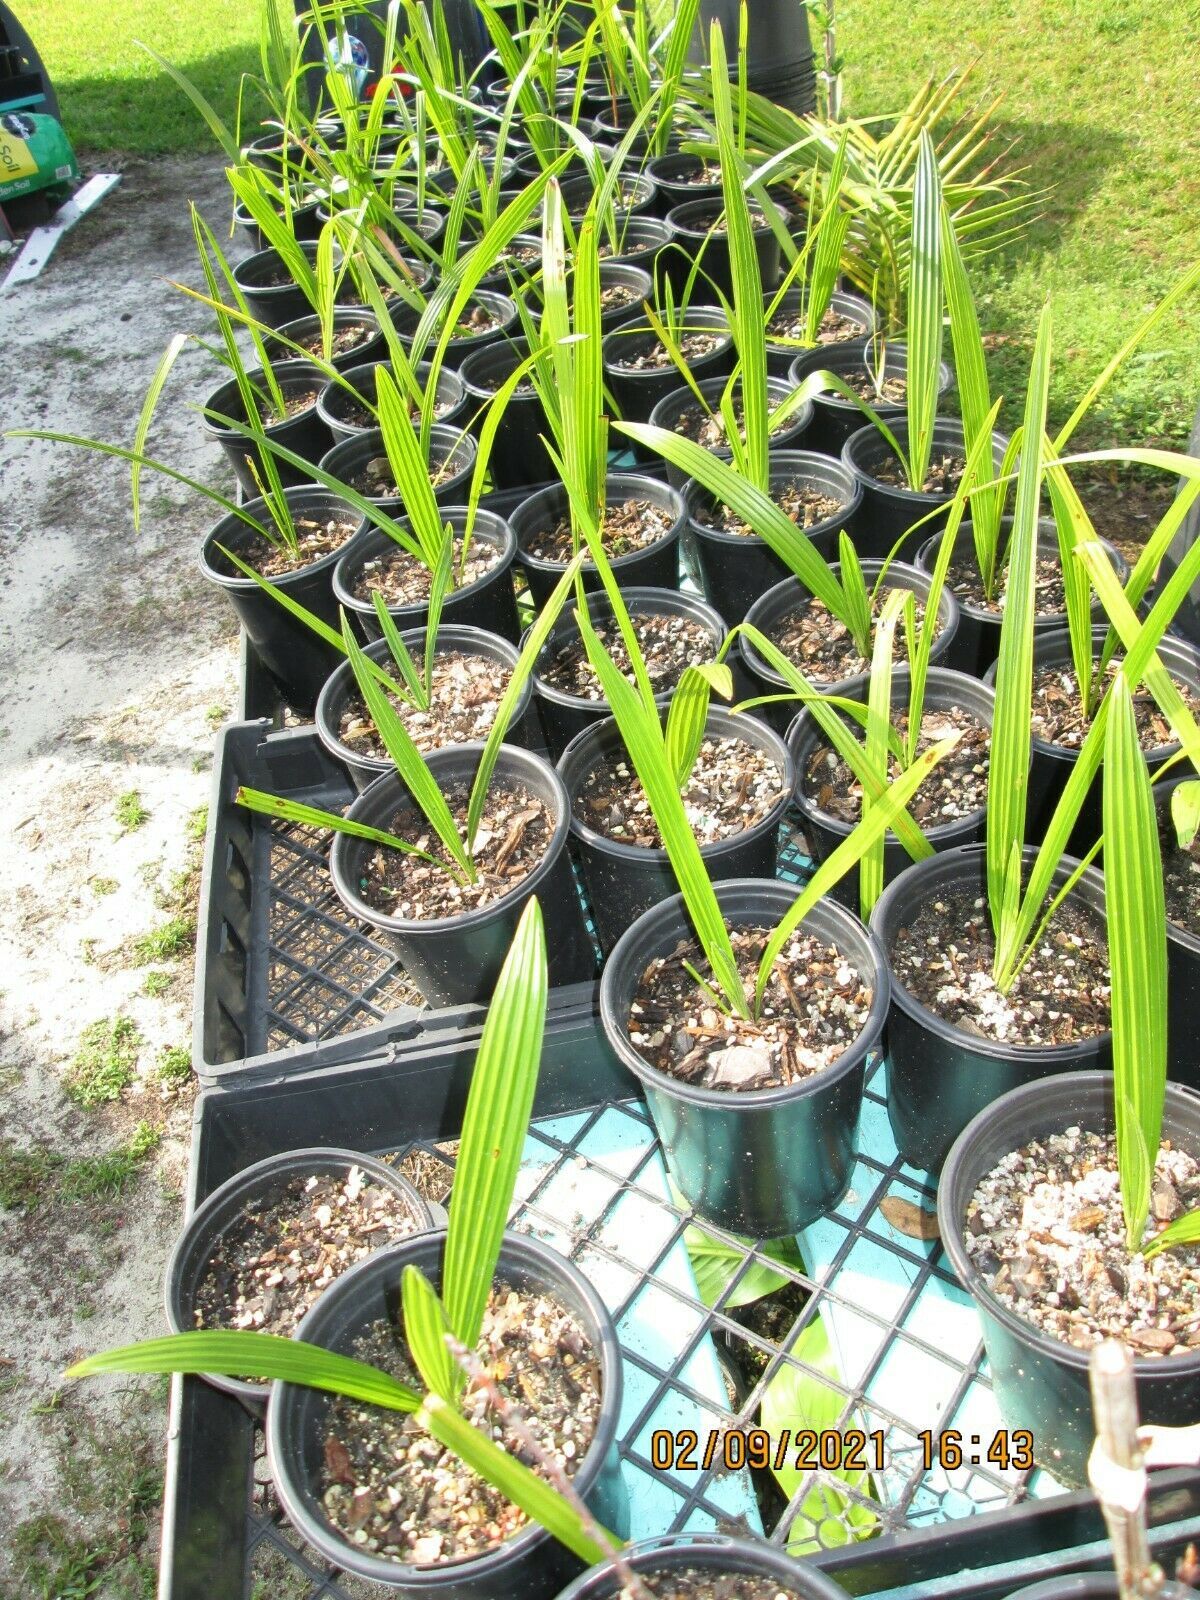 SUMMER SPECIAL - 2 Yr. Canary Island Date Palm Tree Seedling. 1 Gallon ...